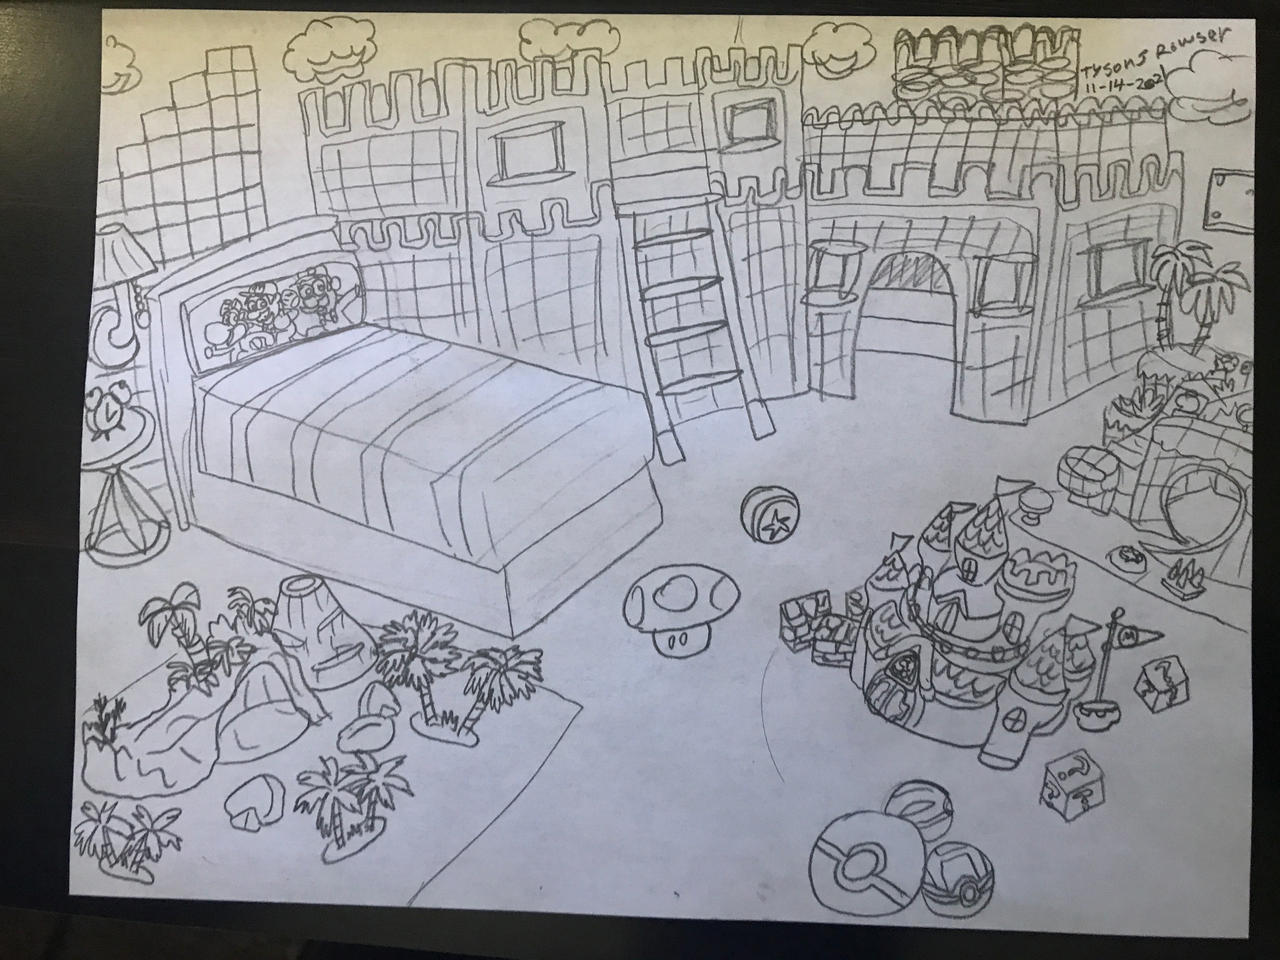 Ssbh Sss hector's lab + andy's room by Bigreatmario-II on DeviantArt